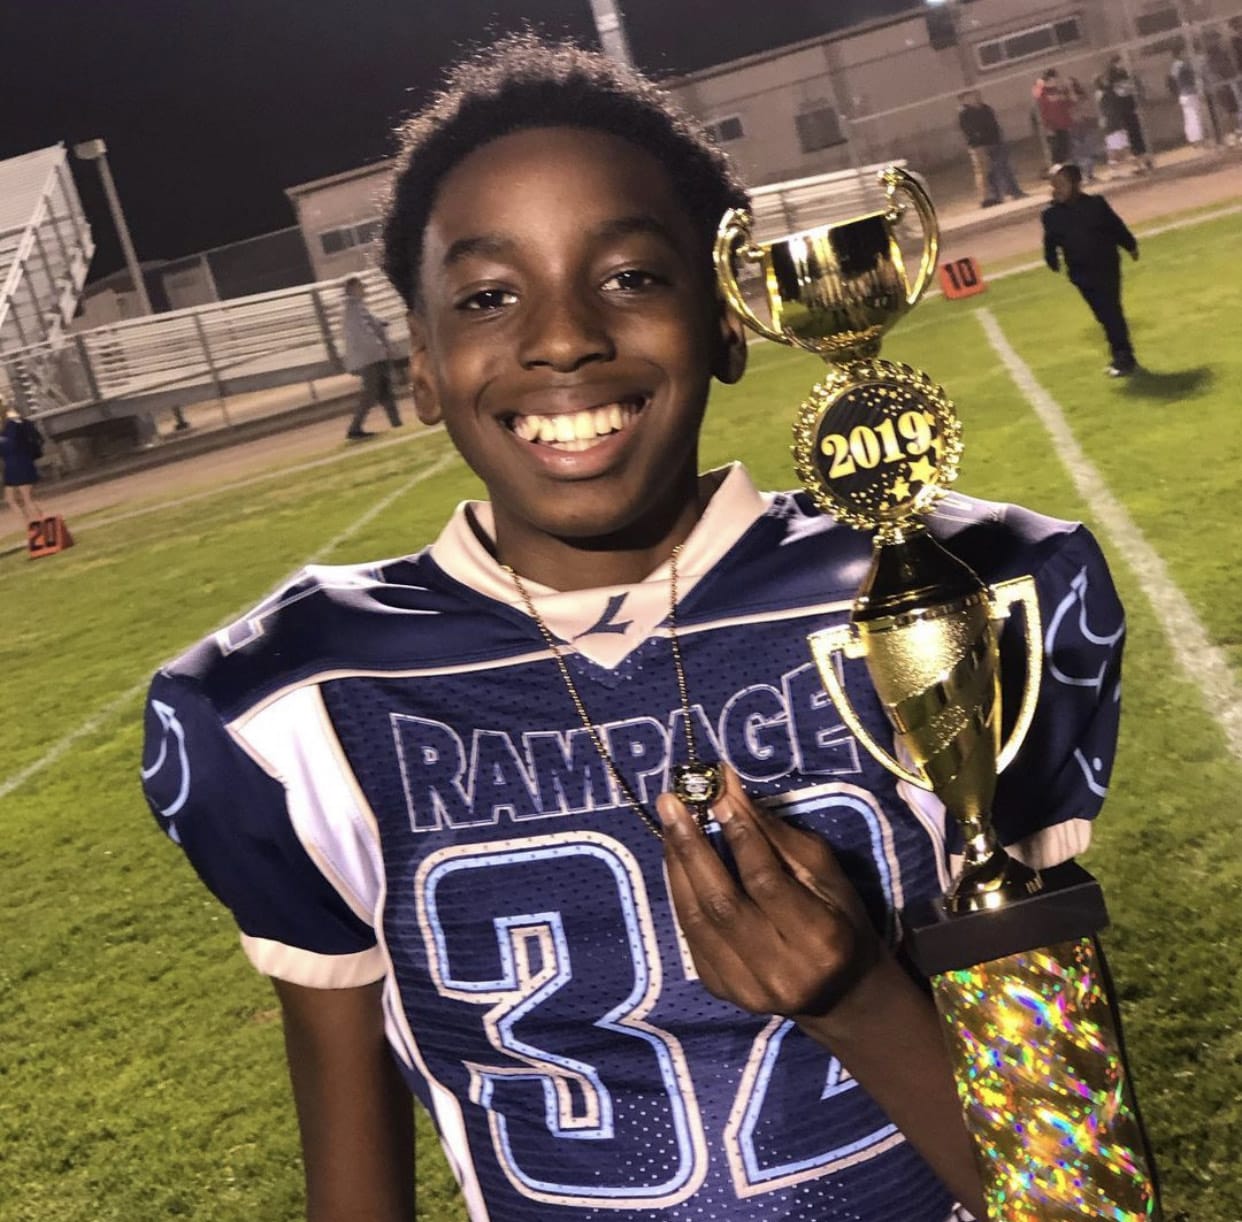 Jeremiah-Riley-14-son-of-Iesha-James-with-football-trophy, Help rebuild 14-year-old Jeremiah, struck by a stray bullet in East Oakland, Local News & Views 